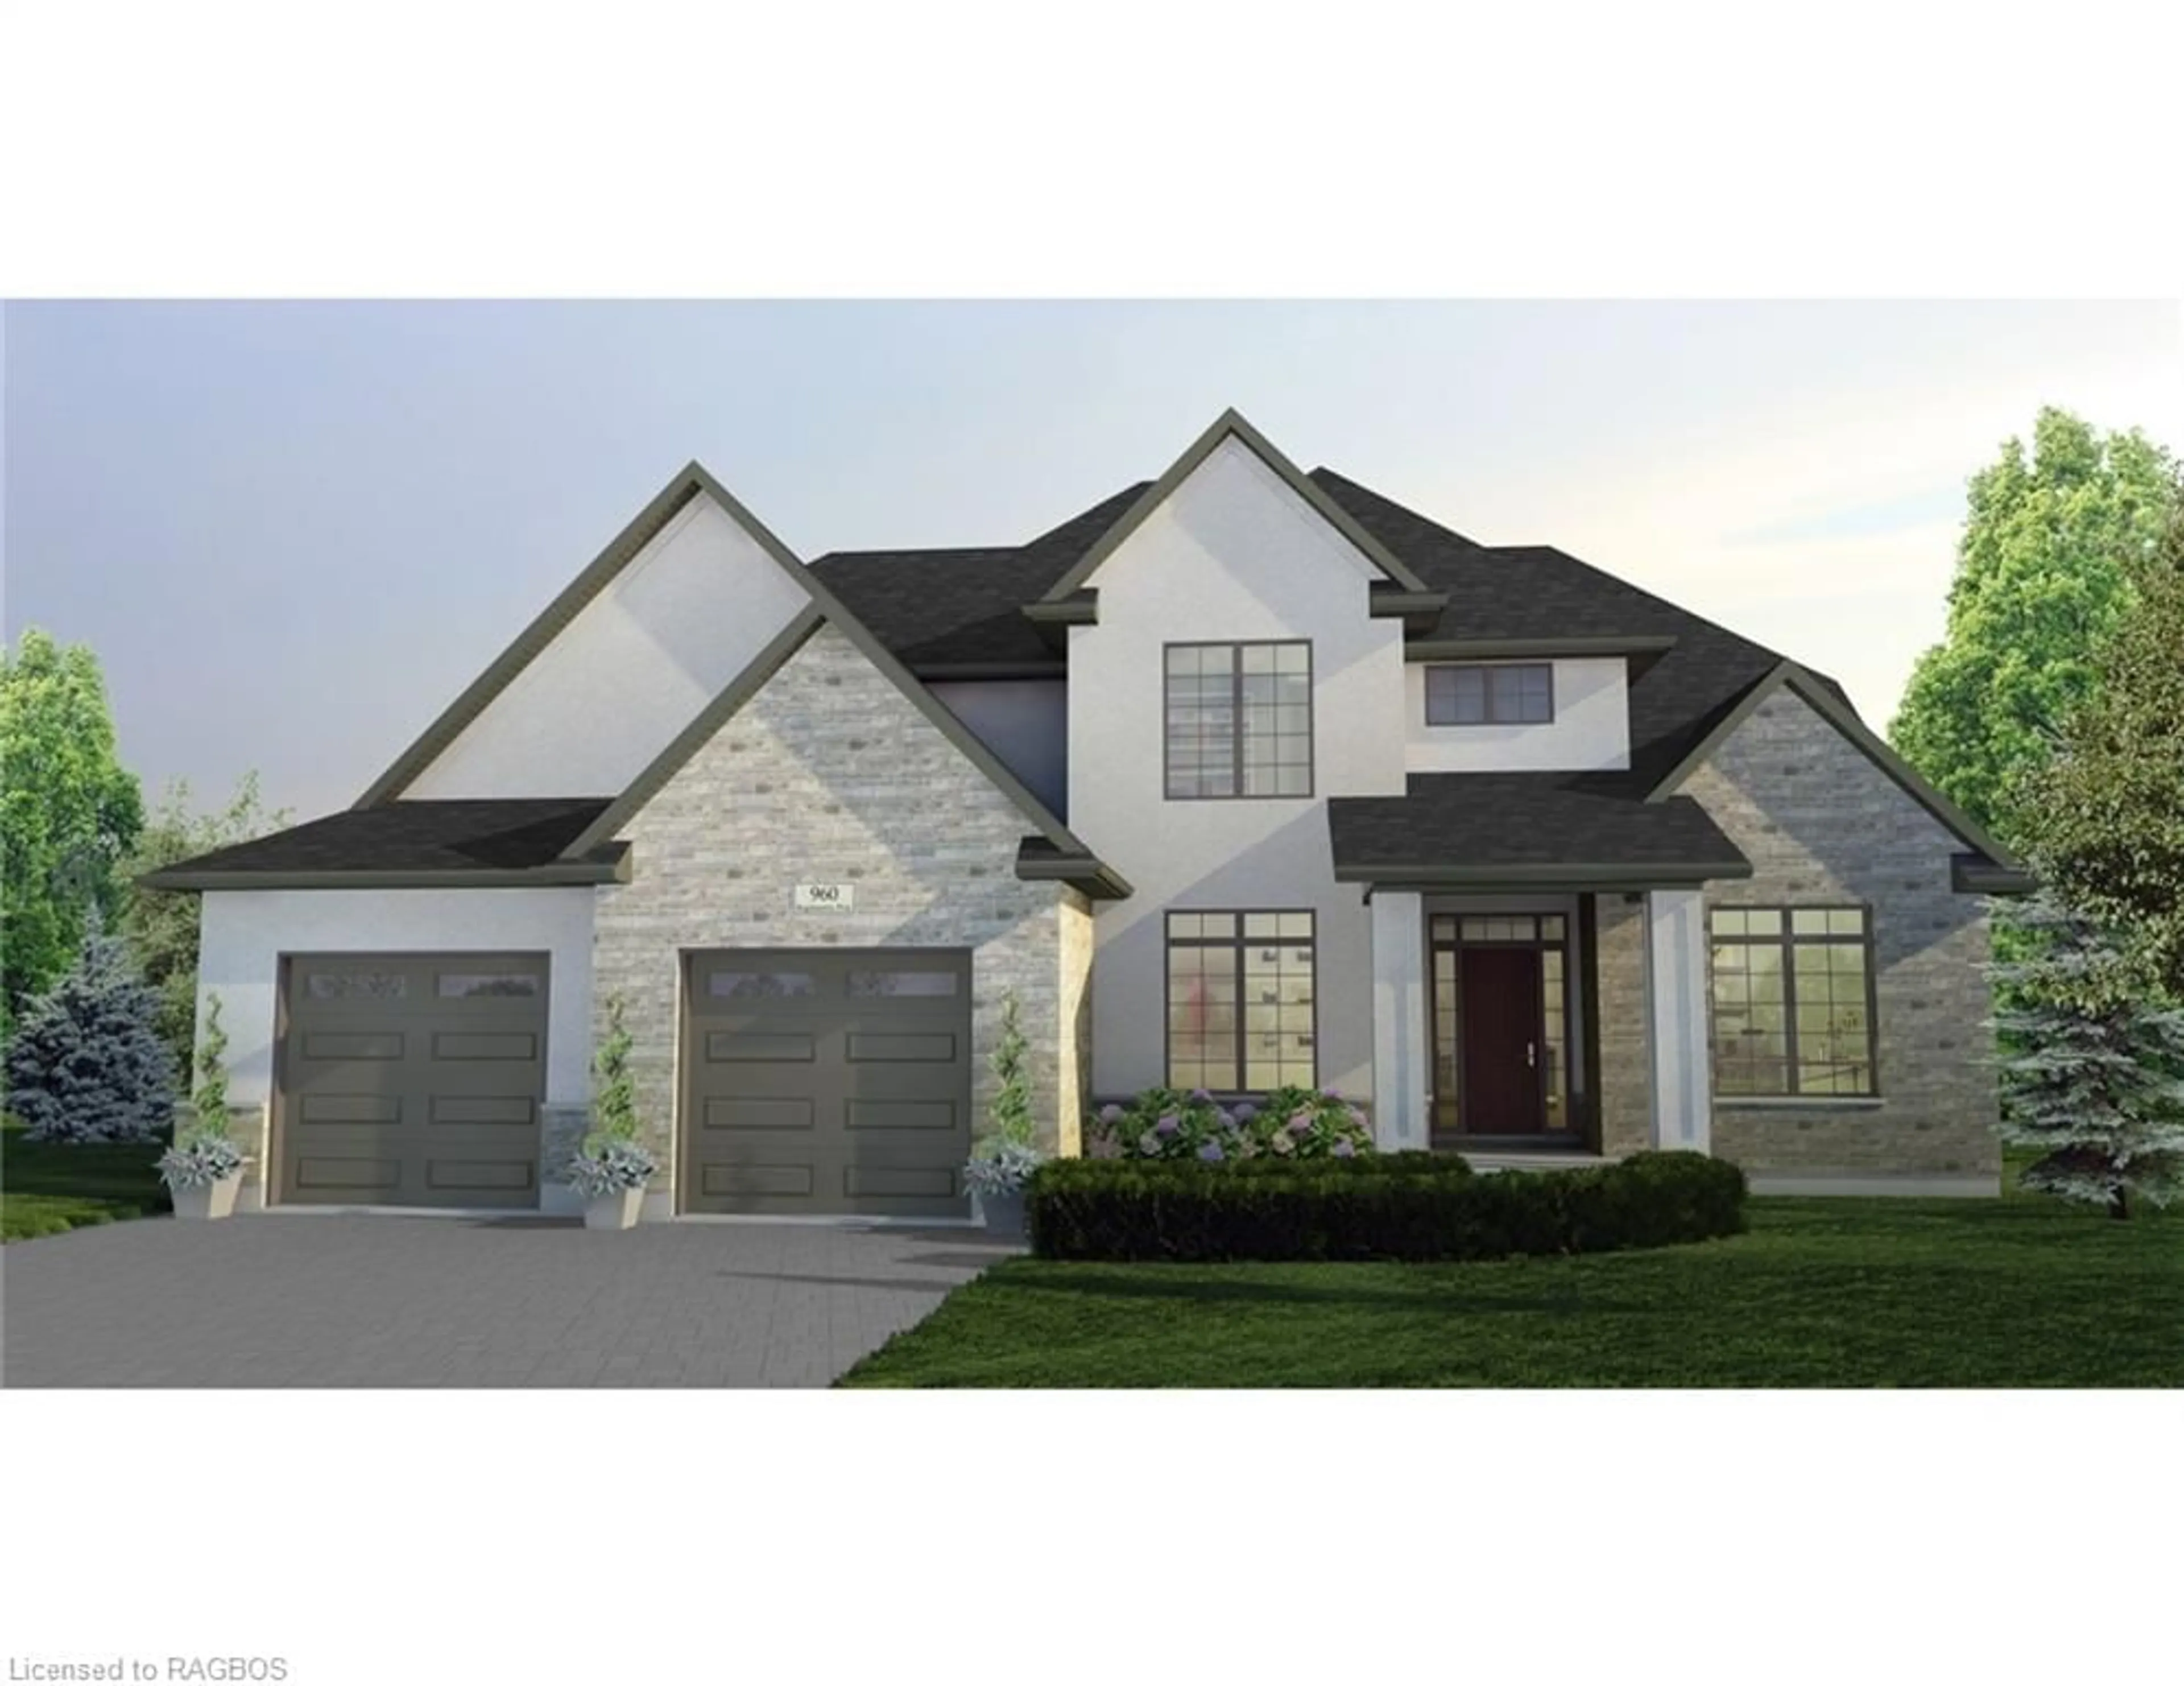 Home with brick exterior material for 960 Bogdanovic Way, Huron-Kinloss Ontario N2Z 0H4